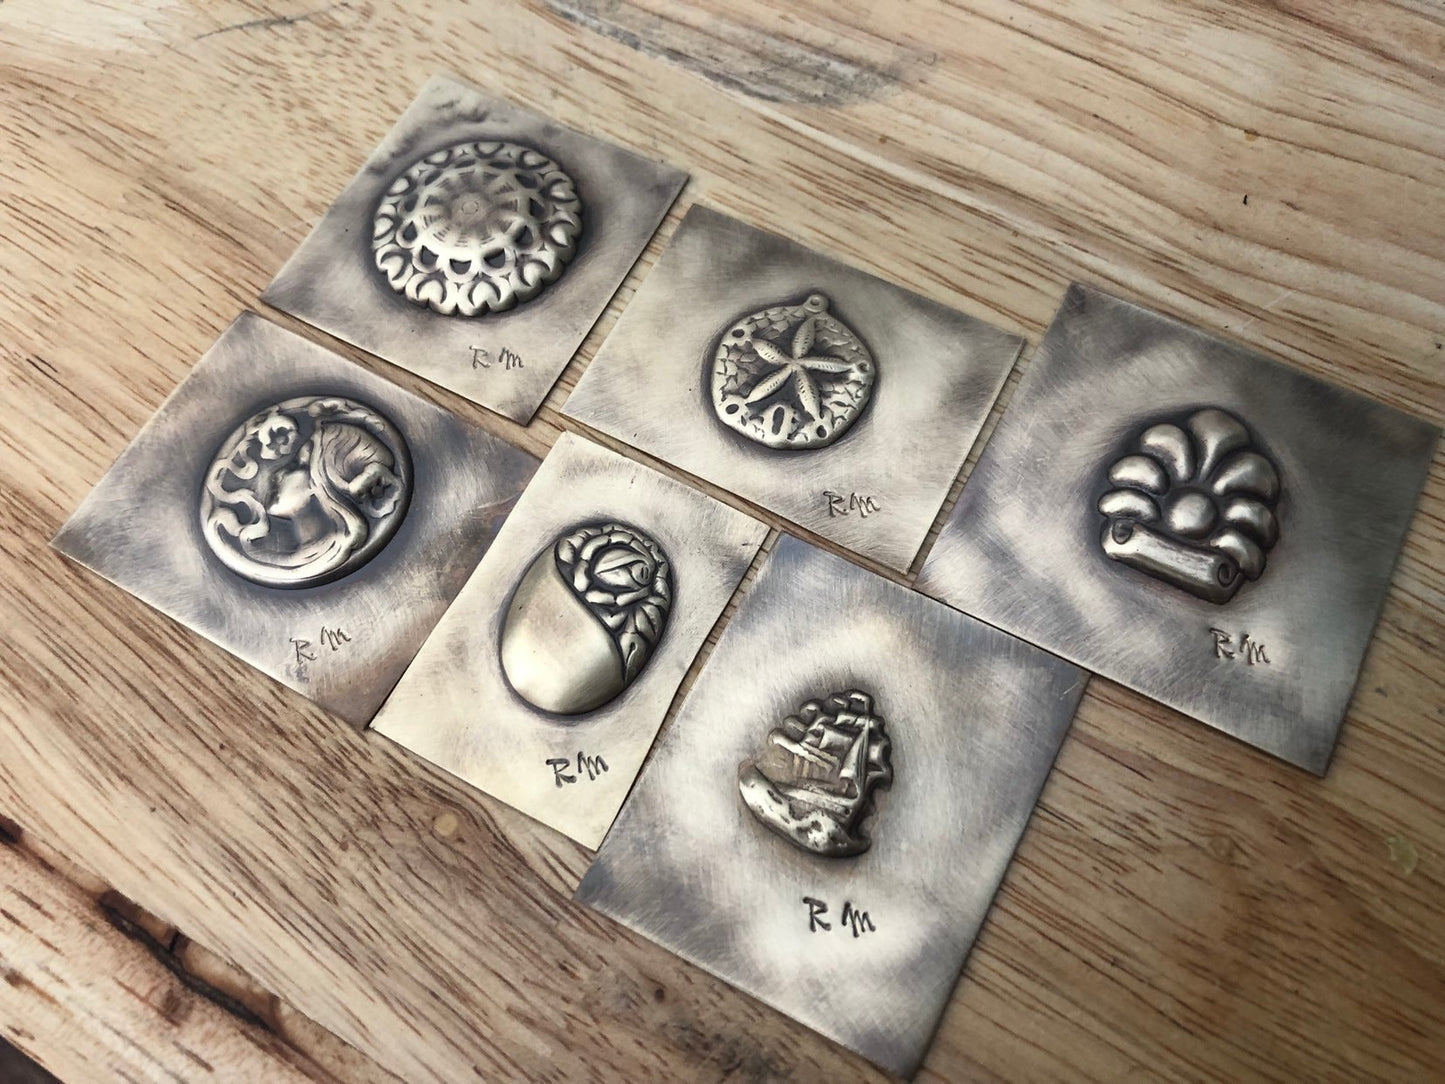 Pressed Metal Round Button Design Impression for Jewelry Making